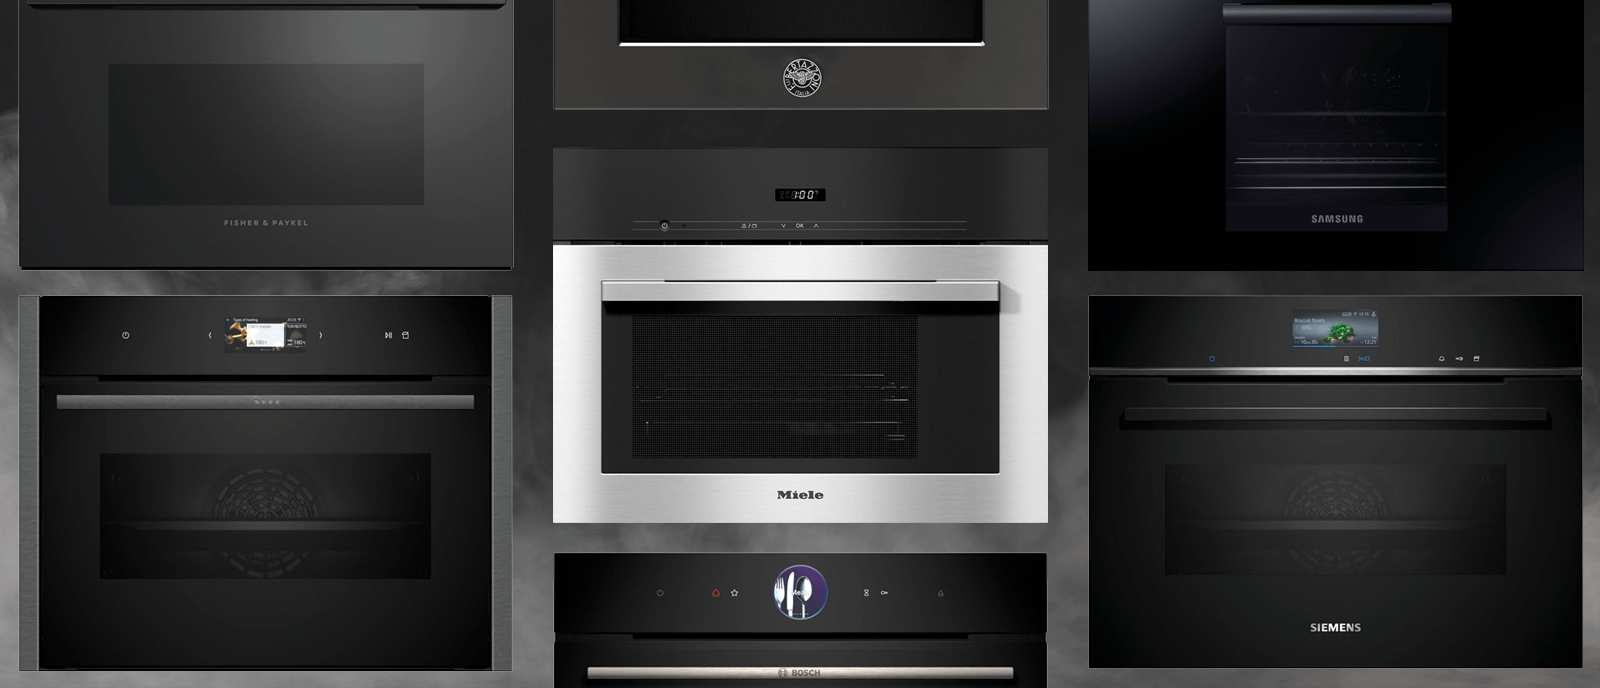 Feature image showing multiple steam ovens against smoky background. Ovens are from multiple brands including Miele, Siemens, Neff, Samsung, Bertazzoni, Fisher & Paykel, and Bosch.